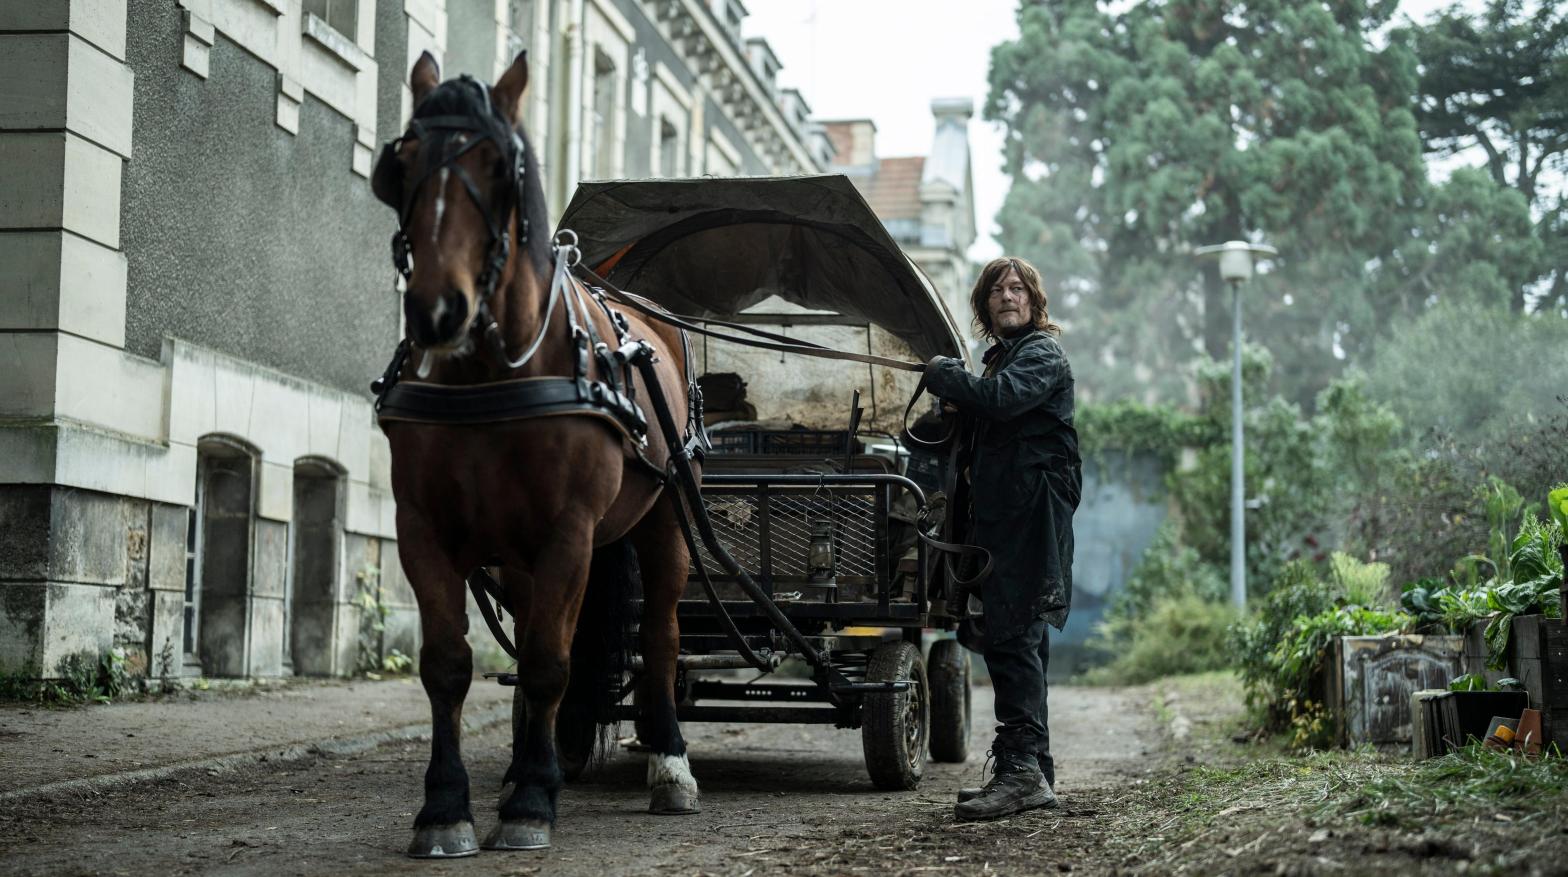 A first-look image from The Walking Dead: Daryl Dixon (Image: AMC)